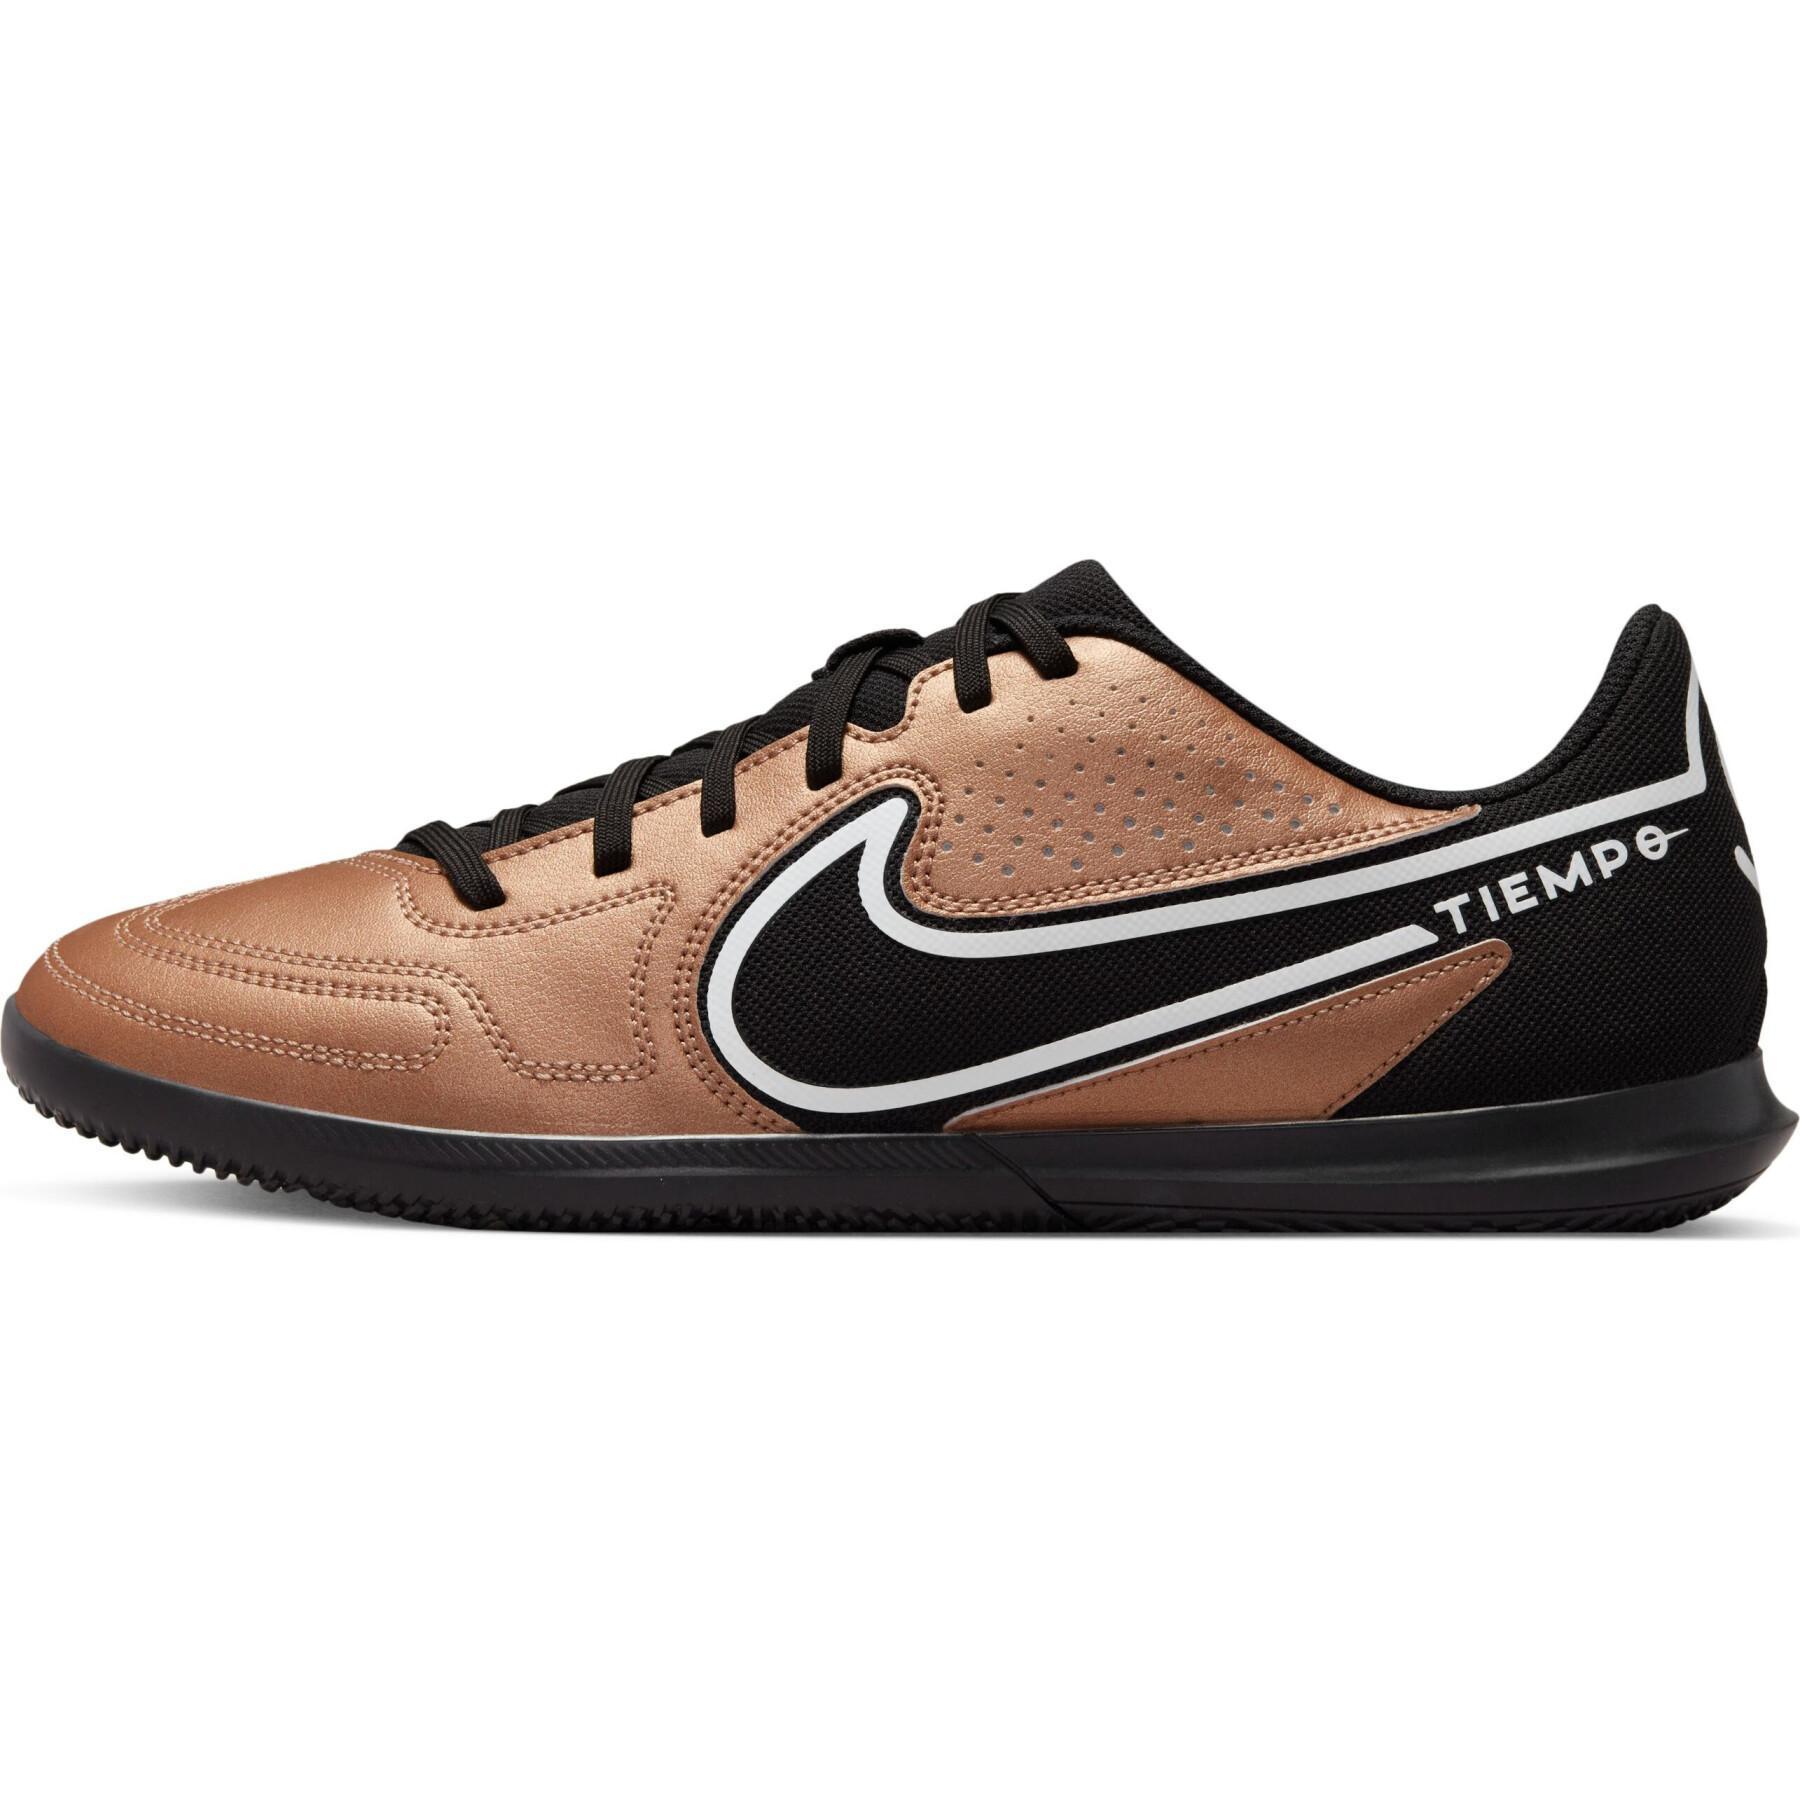 Chaussures de football Nike Tiempo Legend 9 Club IC - Generation Pack